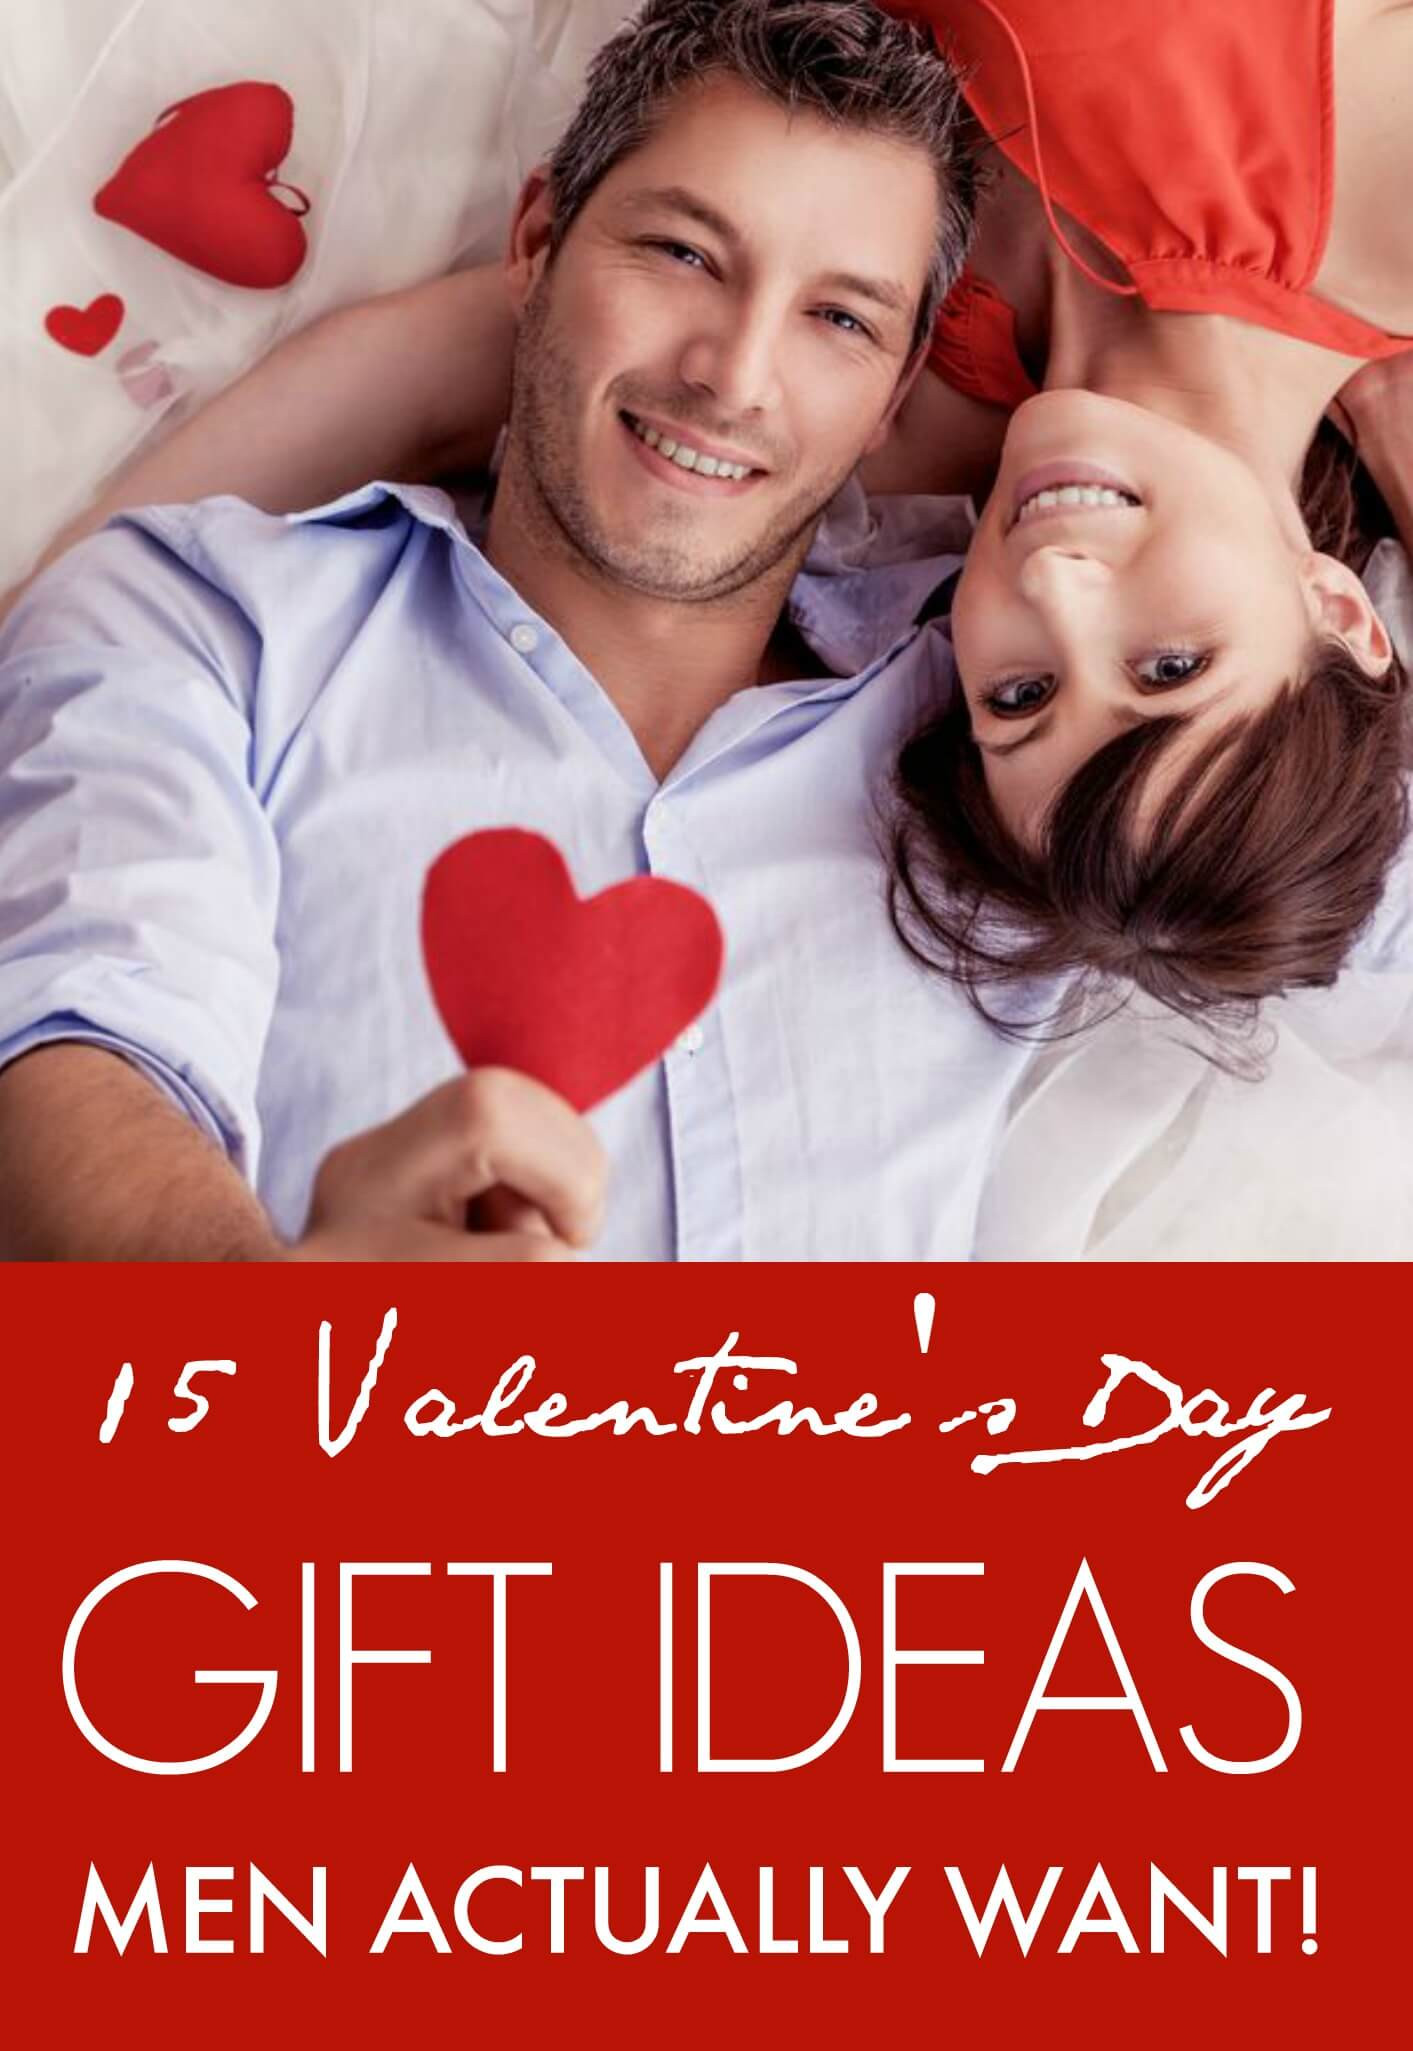 Ideas For Guys Valentines Gift
 15 Valentine’s Day Gift ideas Men Actually Want